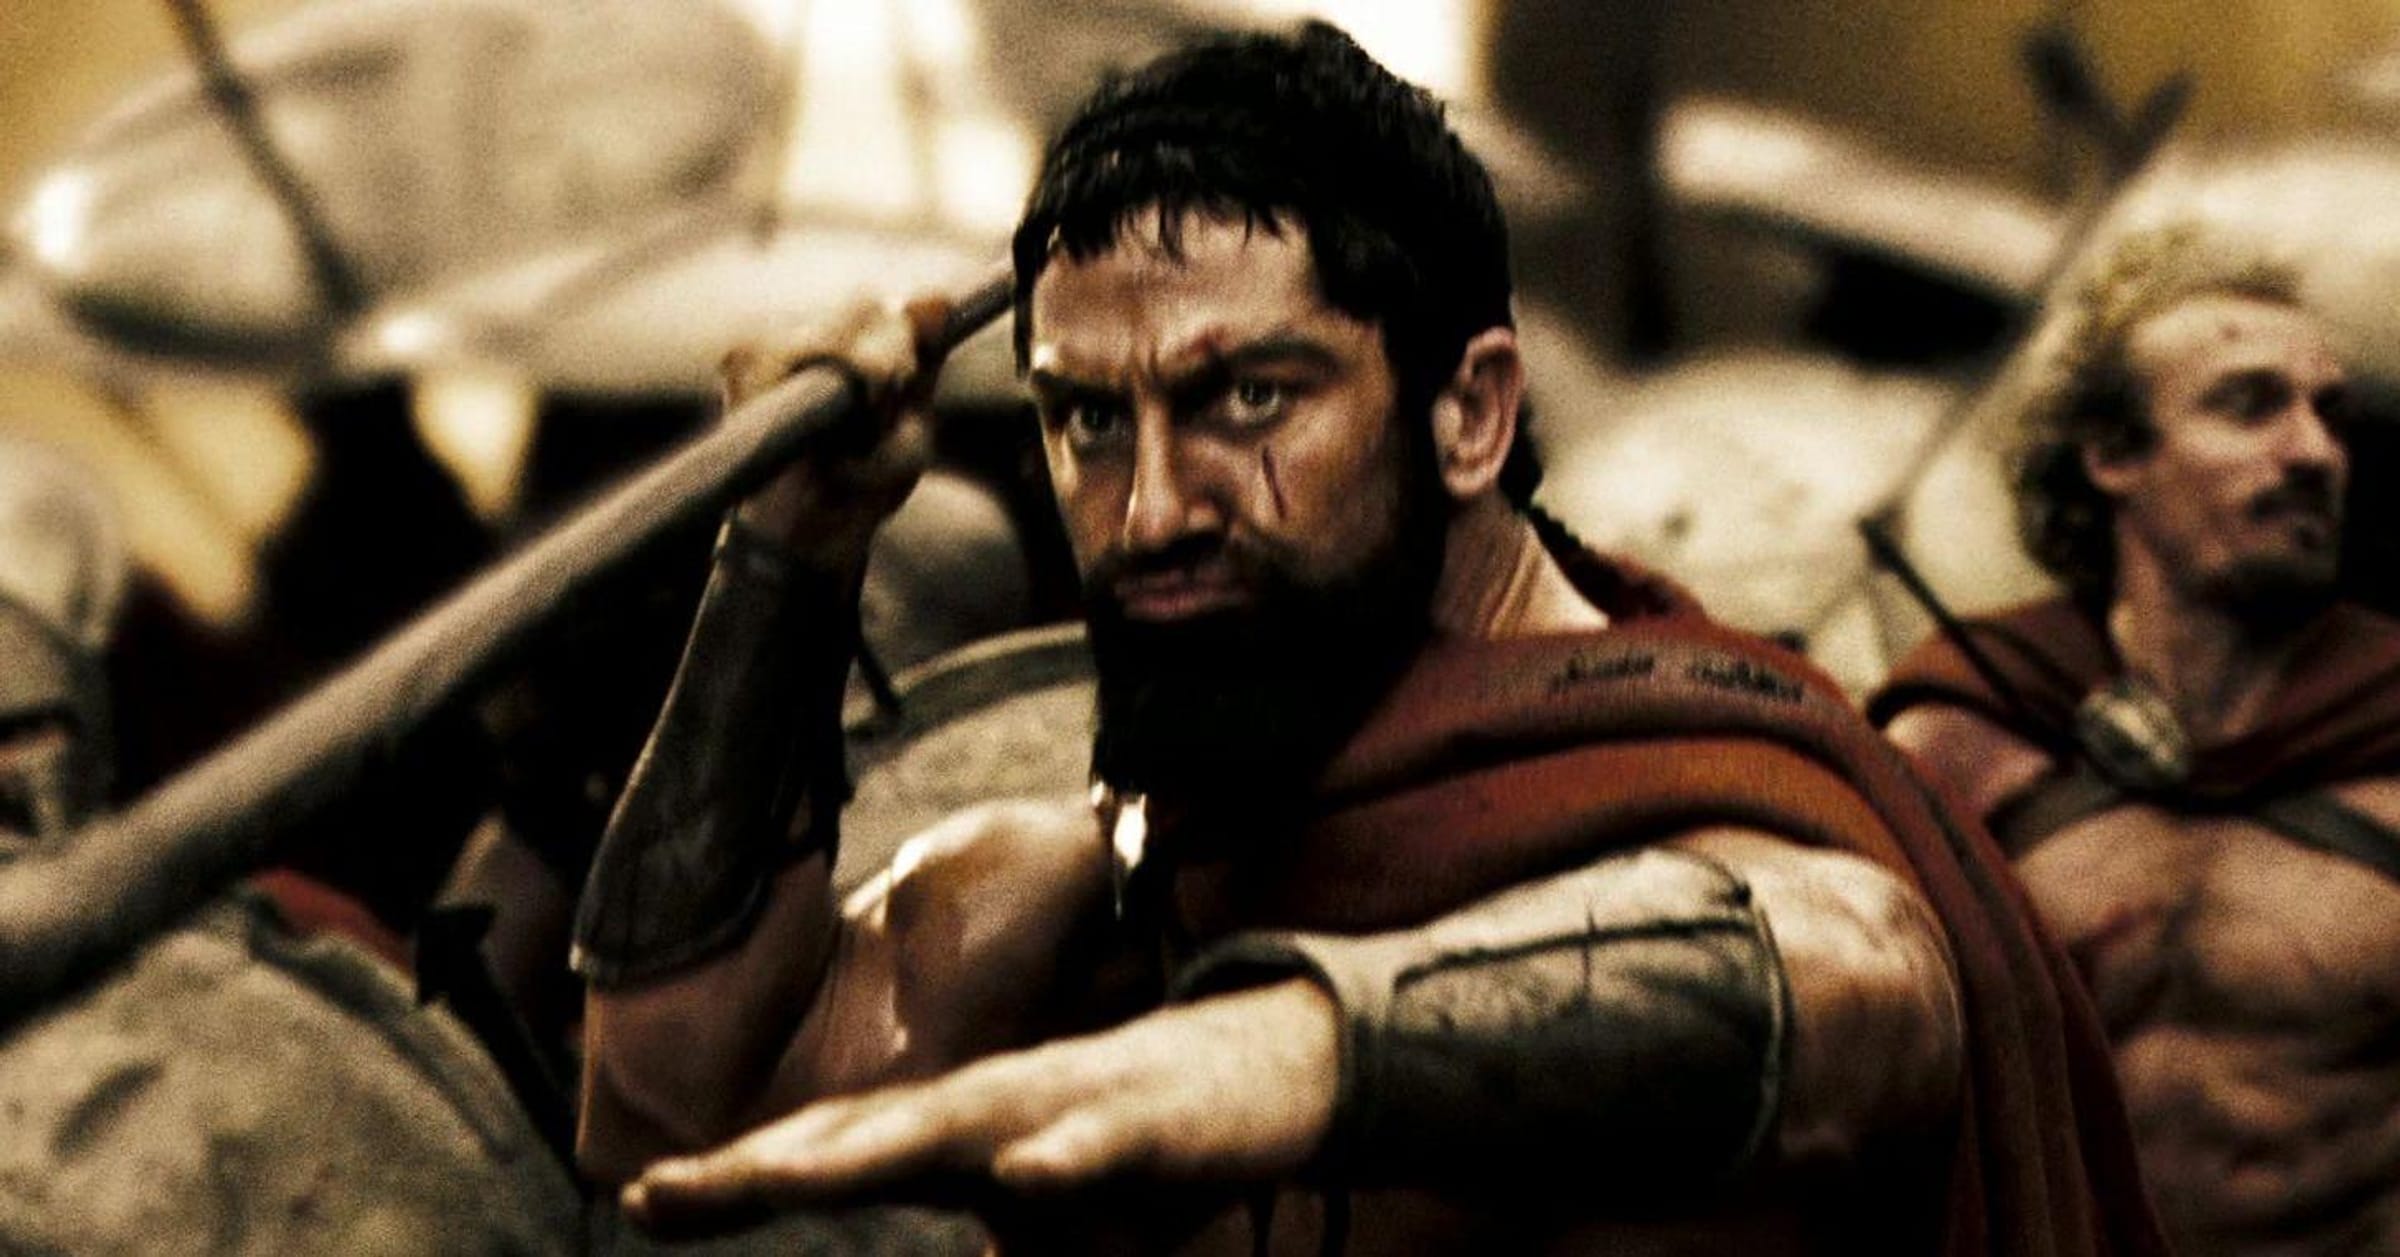 Everyone On Set Laughed When Gerard Butler Shouted His Infamous